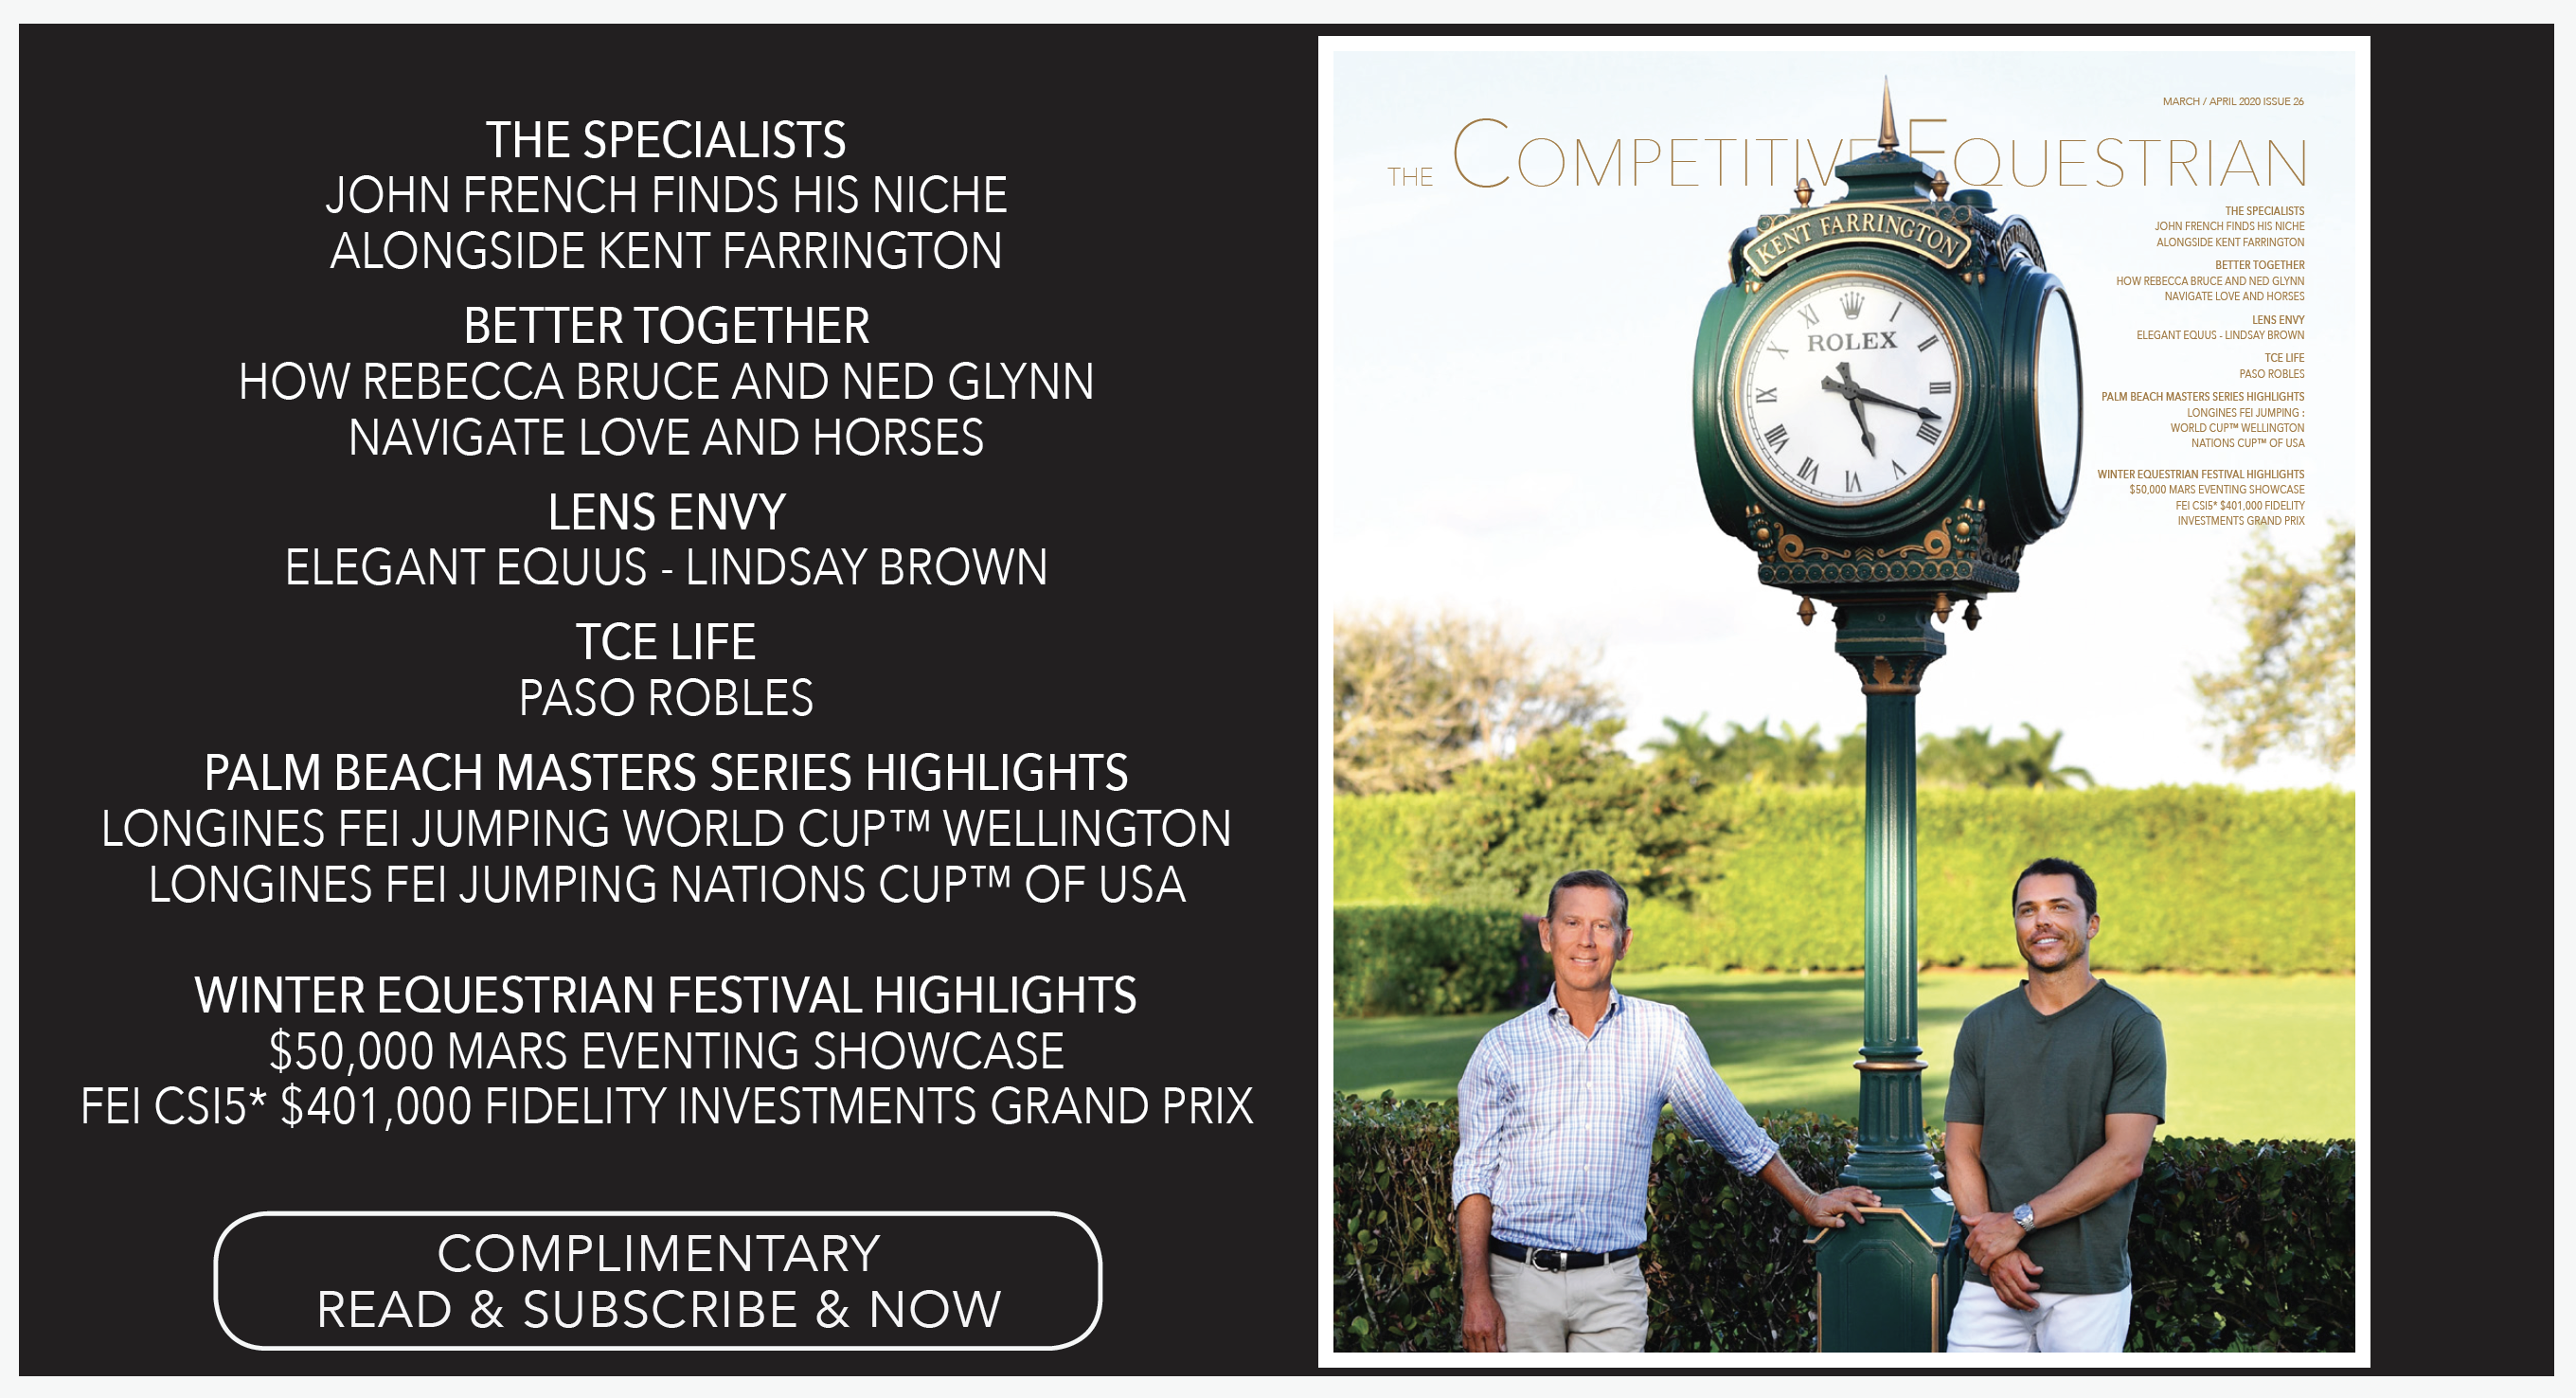 https://www.thecompetitiveequestrian.com